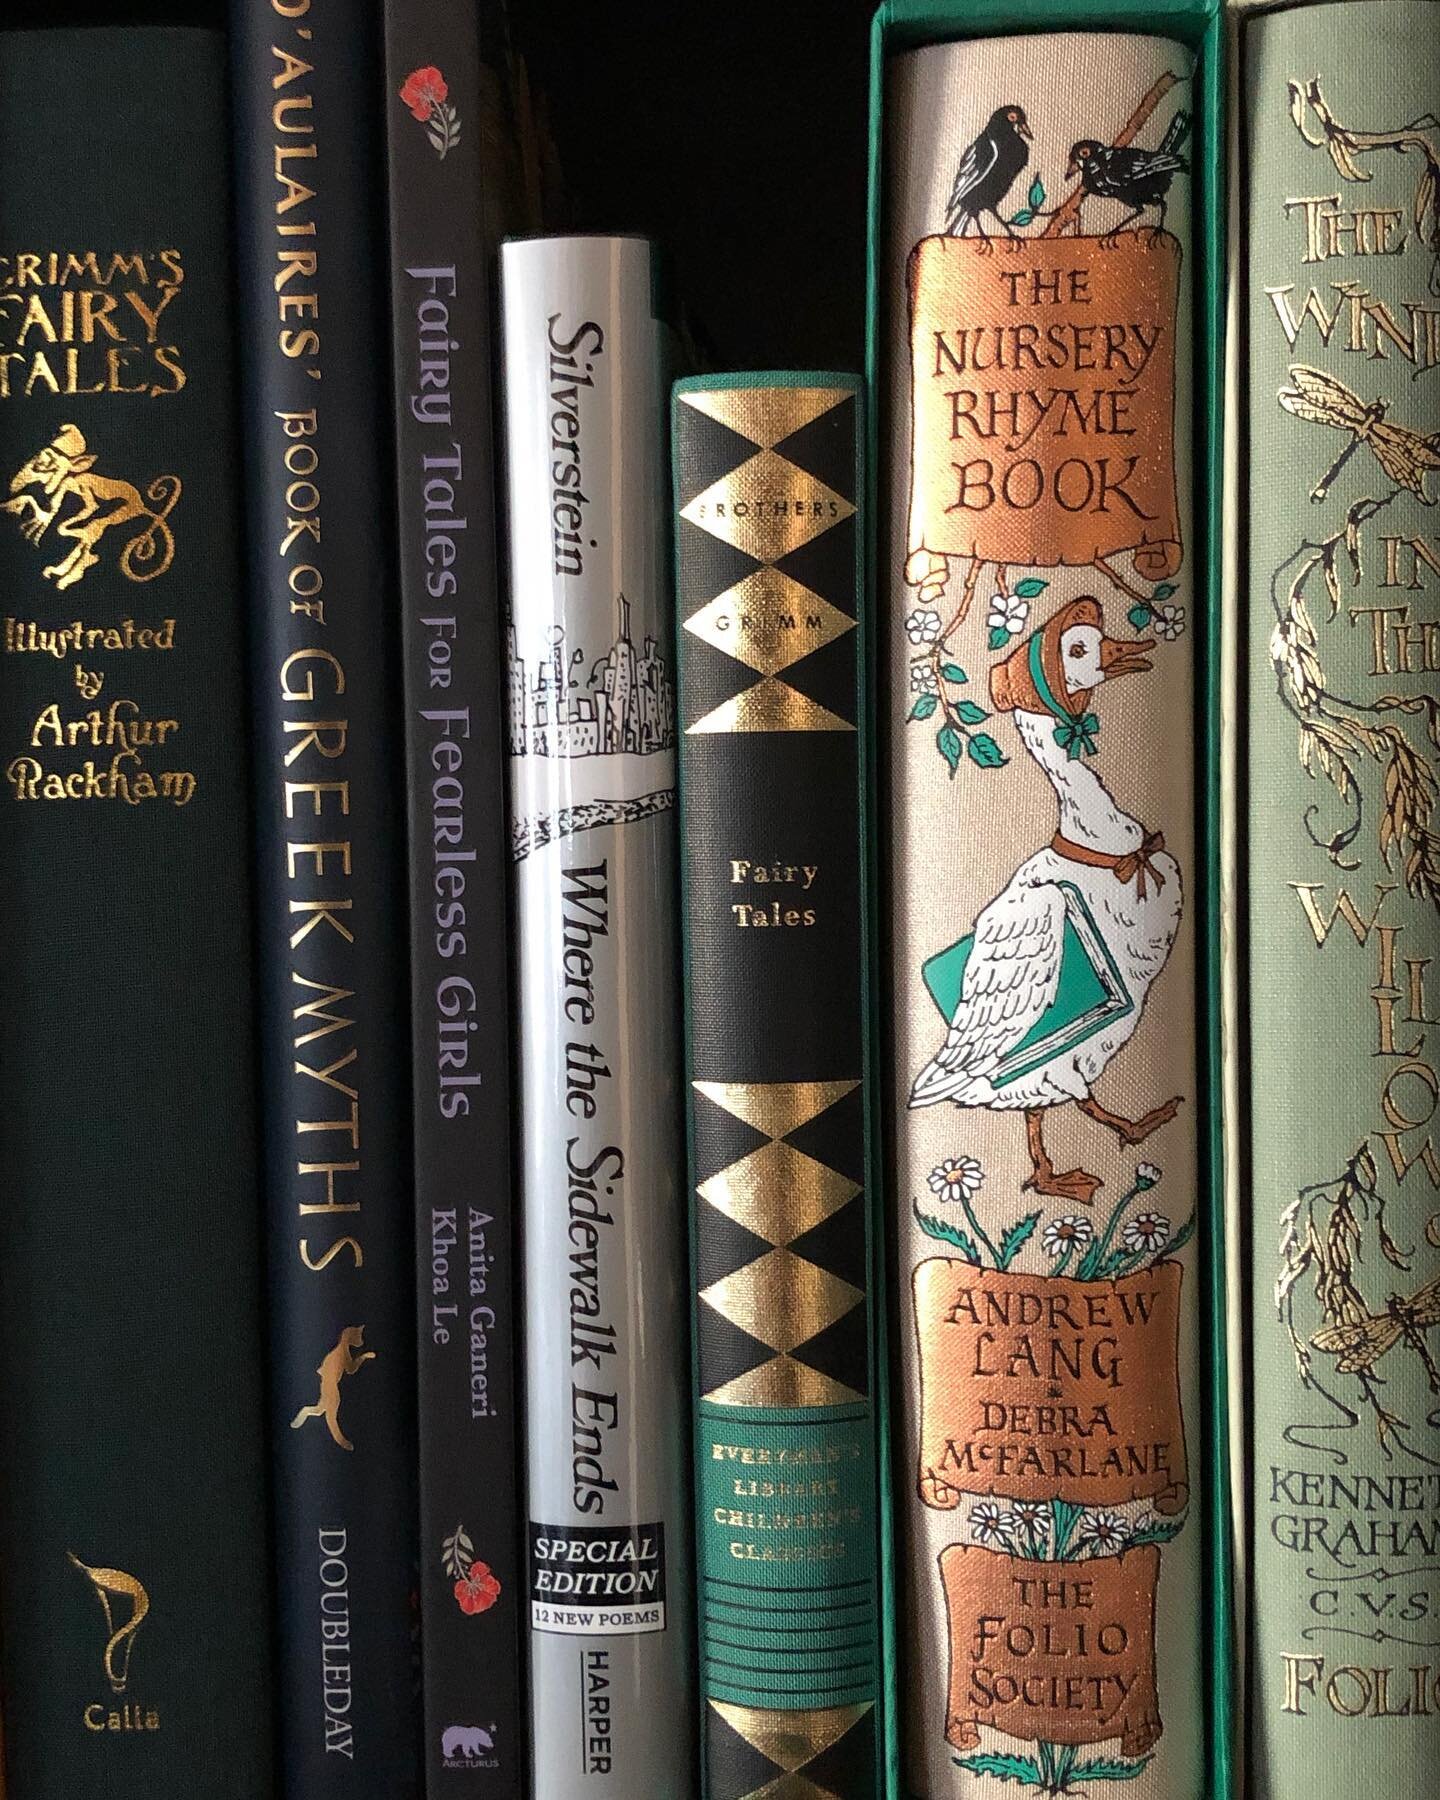 Do you remember the first book that felt special to you, as a child? So magical or beautiful or strangely wonderful, you couldn't believe you were allowed to touch it? I love curating home libraries for adults, but children's book collections still h